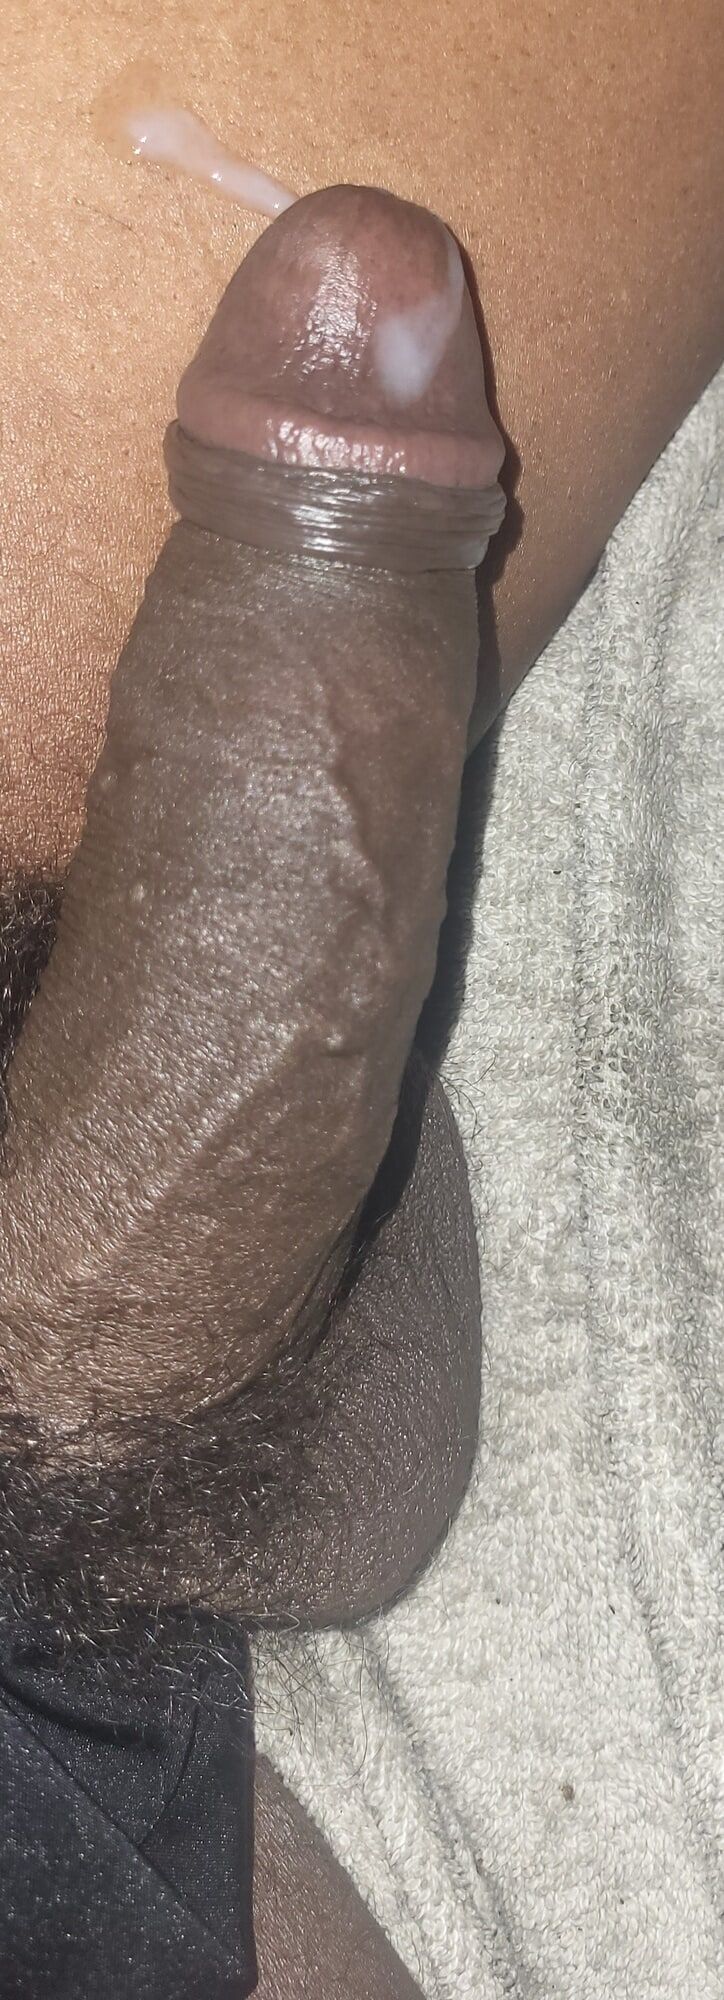 My Dick with Cum for your holes #7